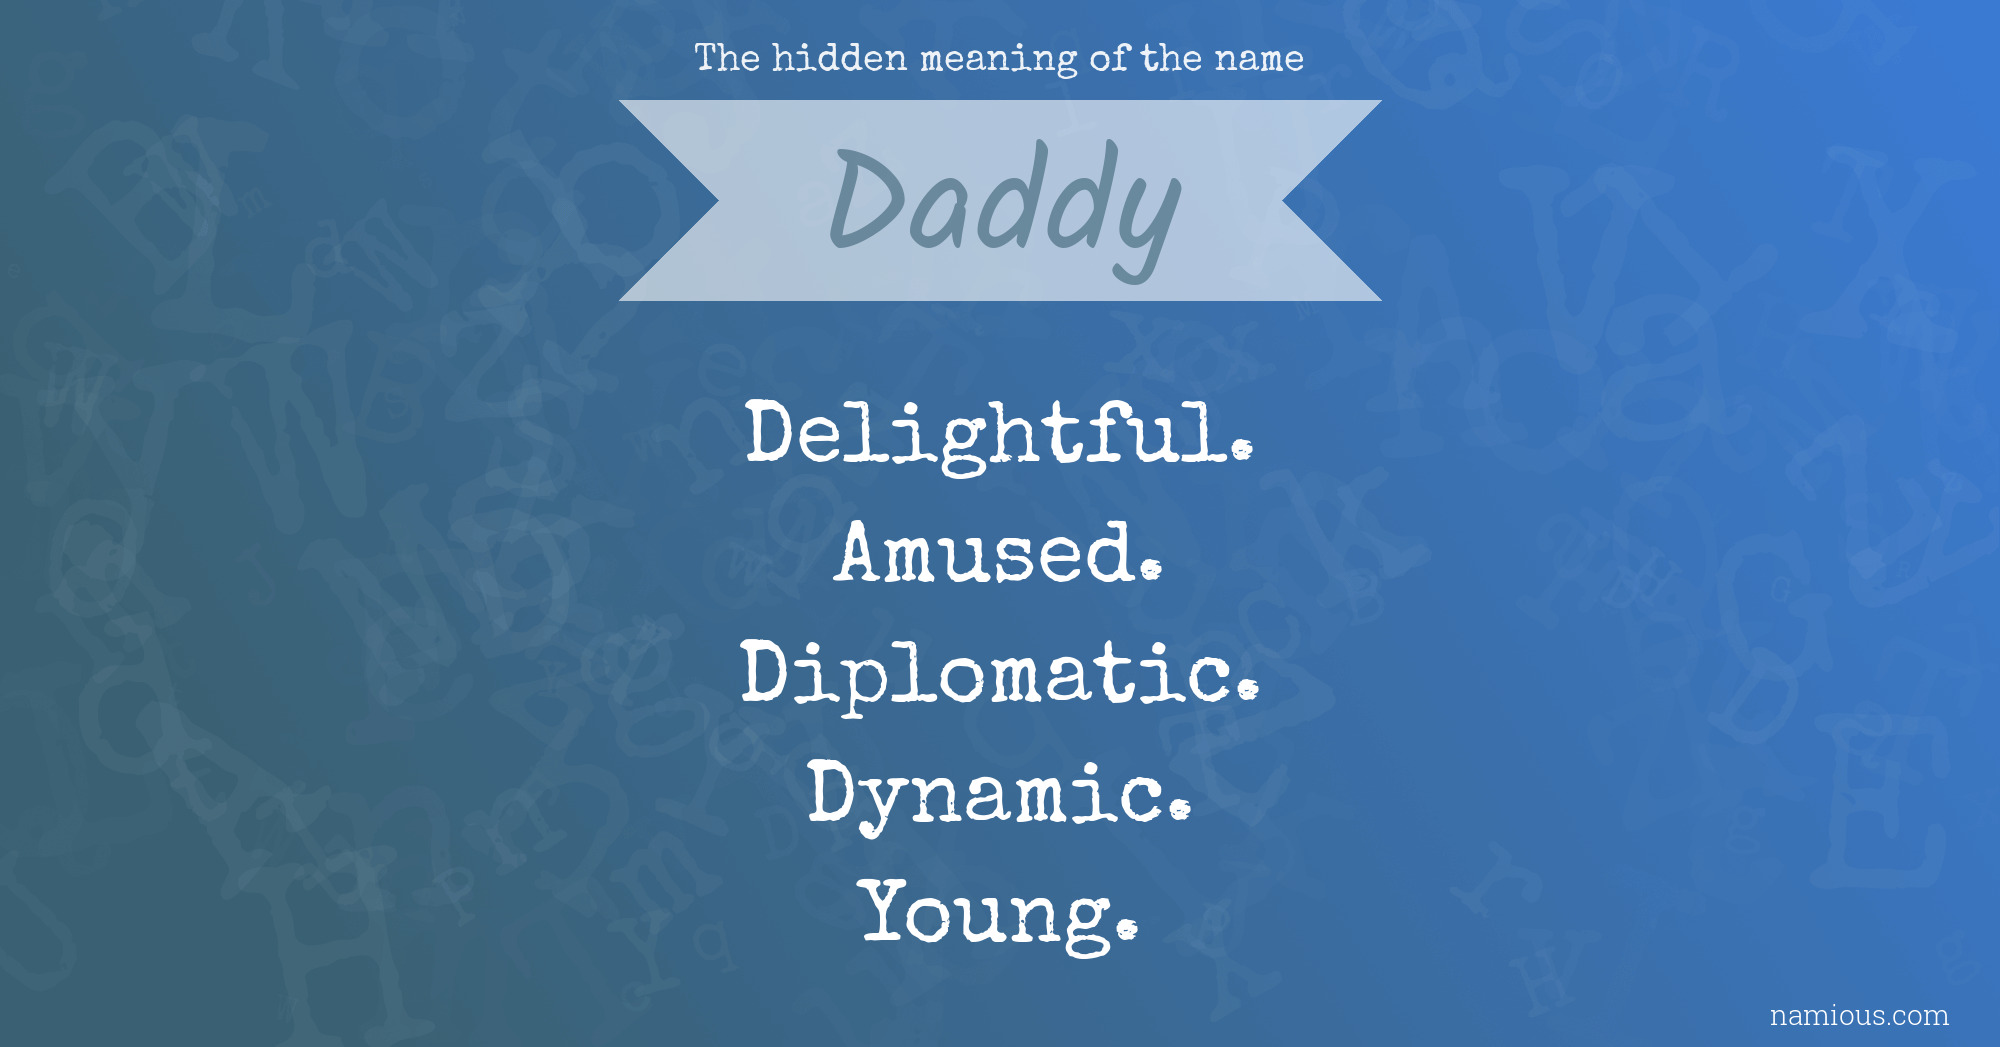 The hidden meaning of the name Daddy